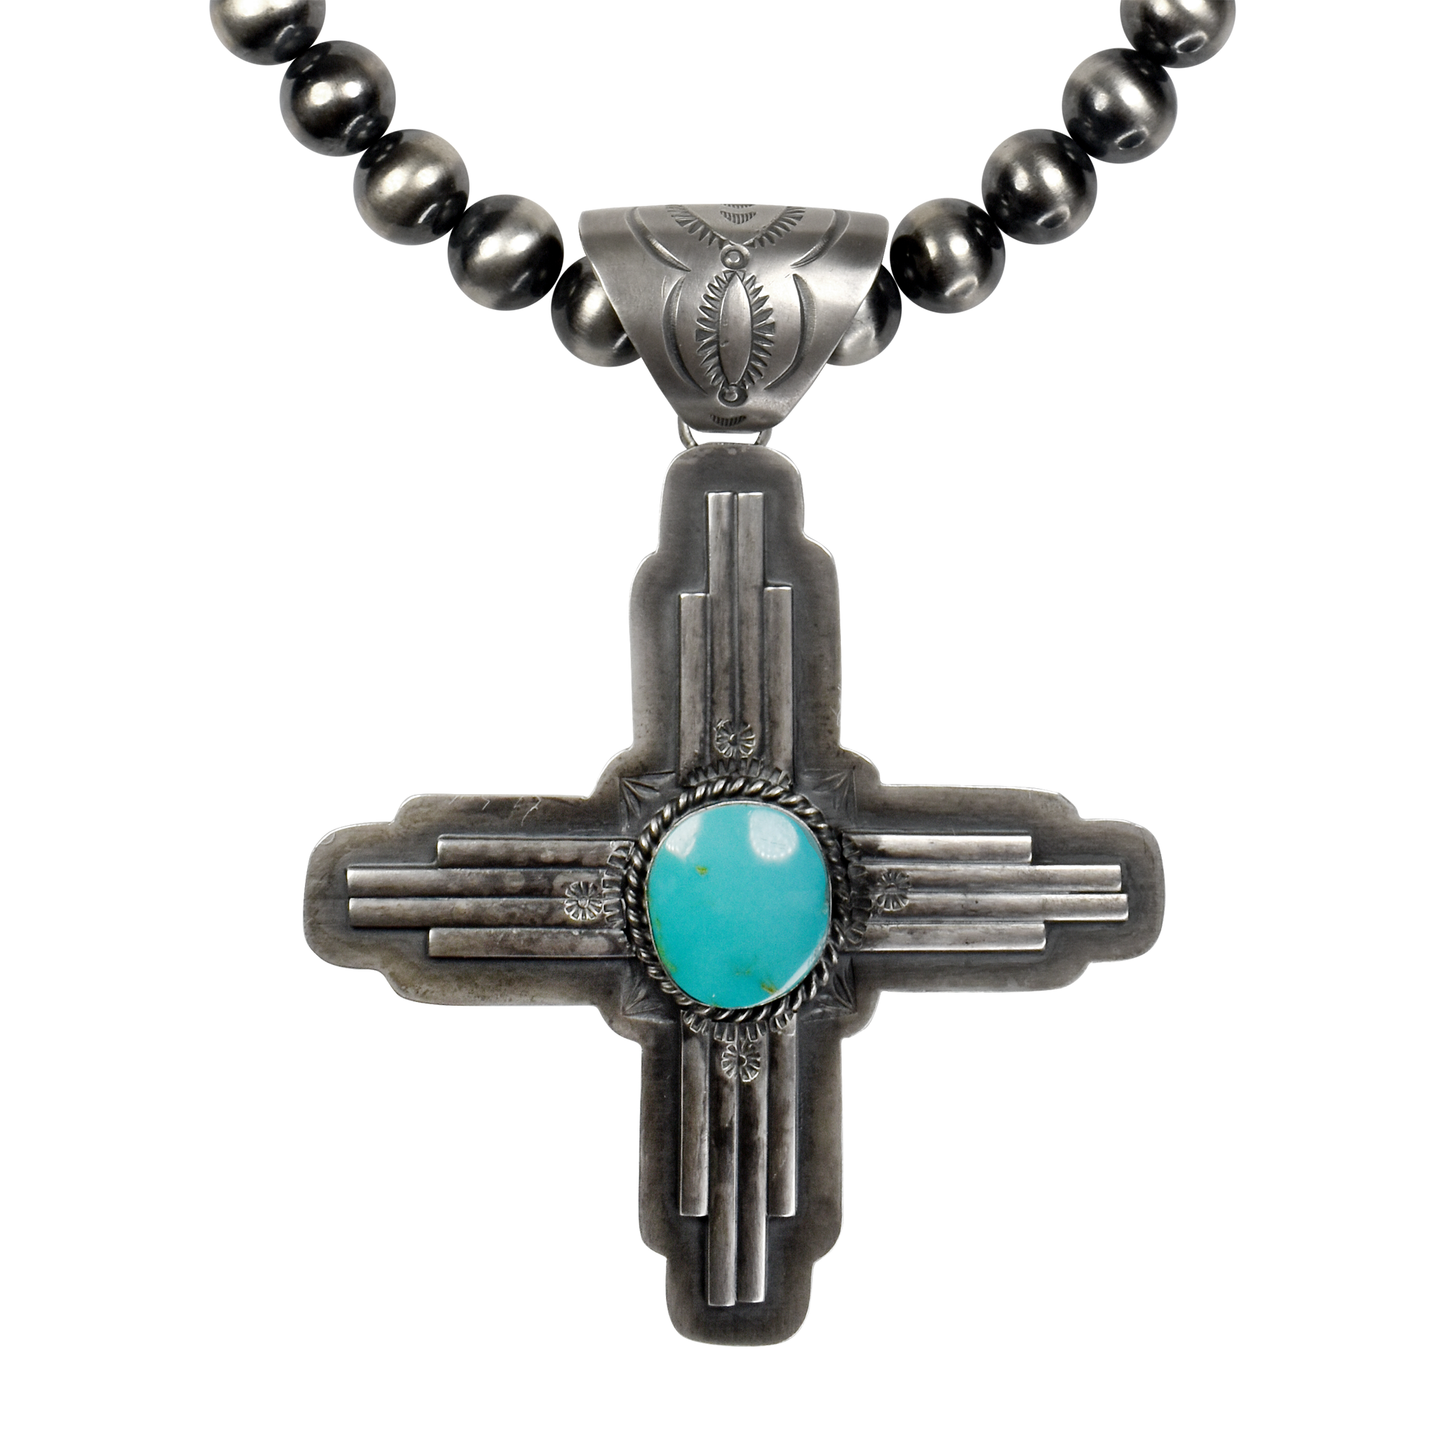 Four Sacred Directions Pilot Mountain Turquoise Pendant & Navajo Pearls by Delbert Secatero